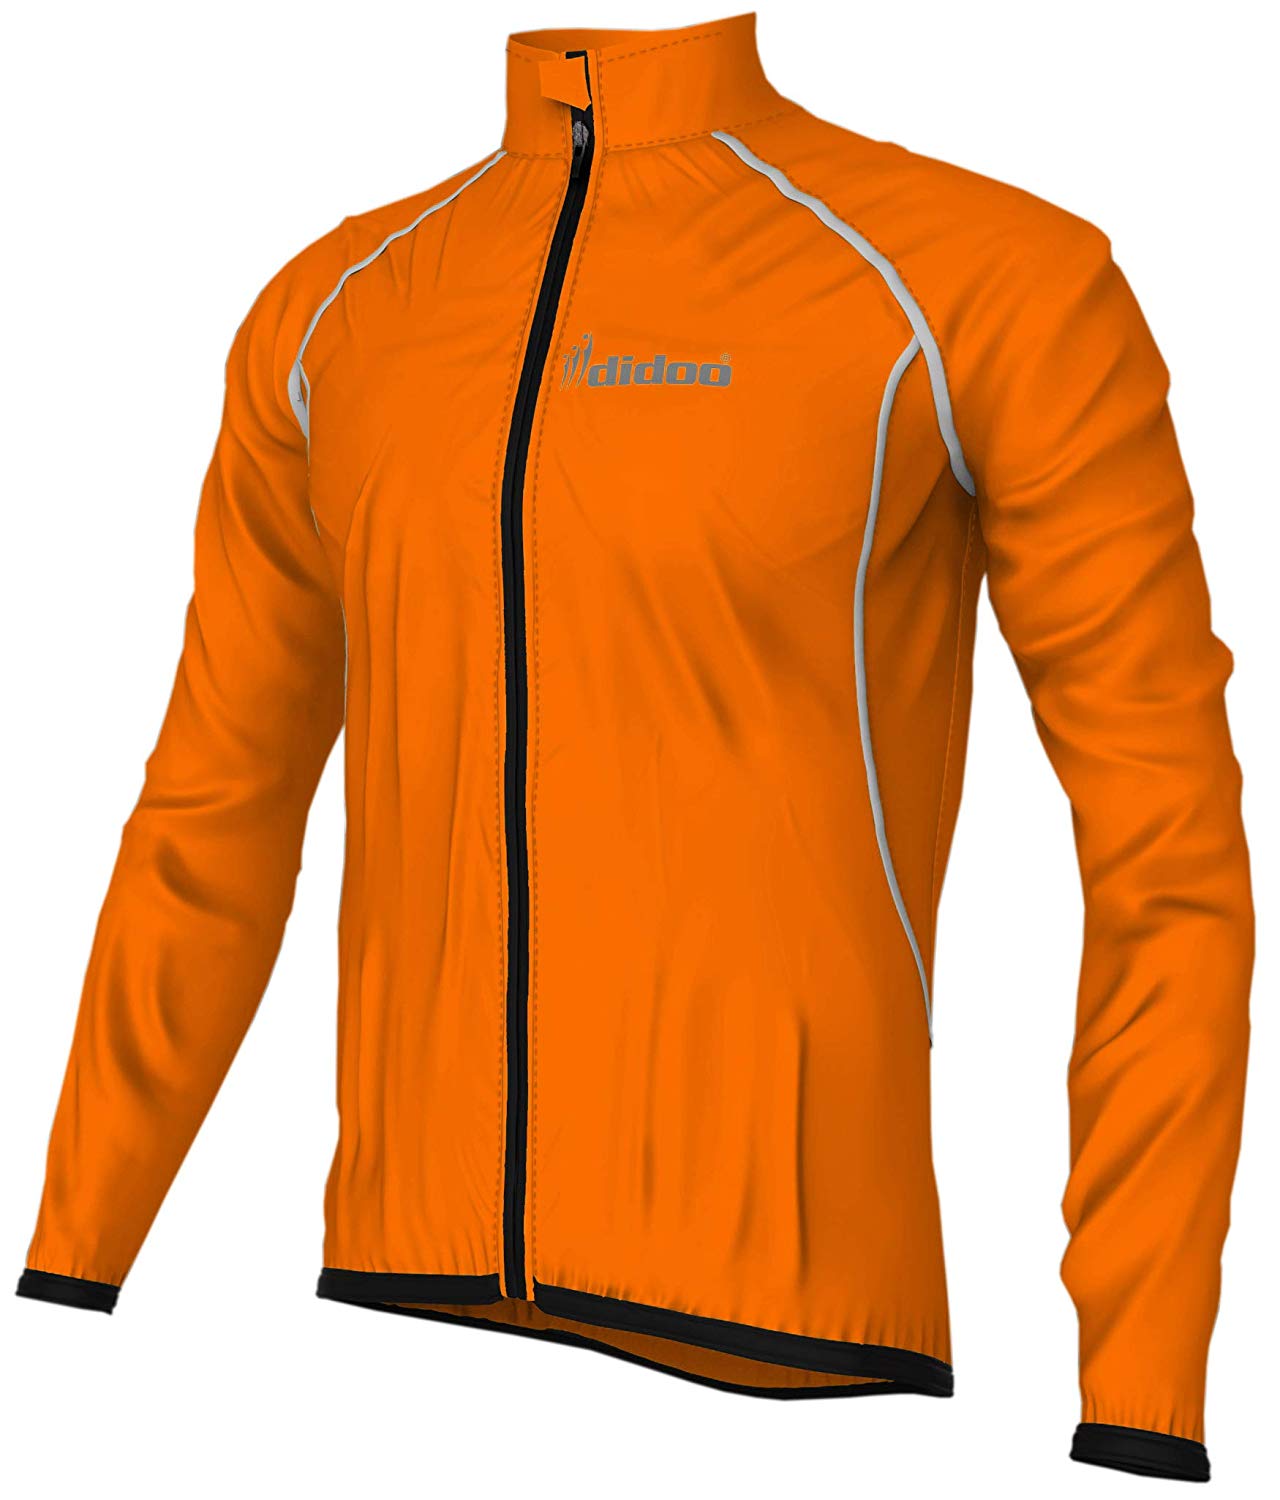 Cycling jacket waterproof mens with Lightweight Breathable Reflective and Cold weather WP-1303